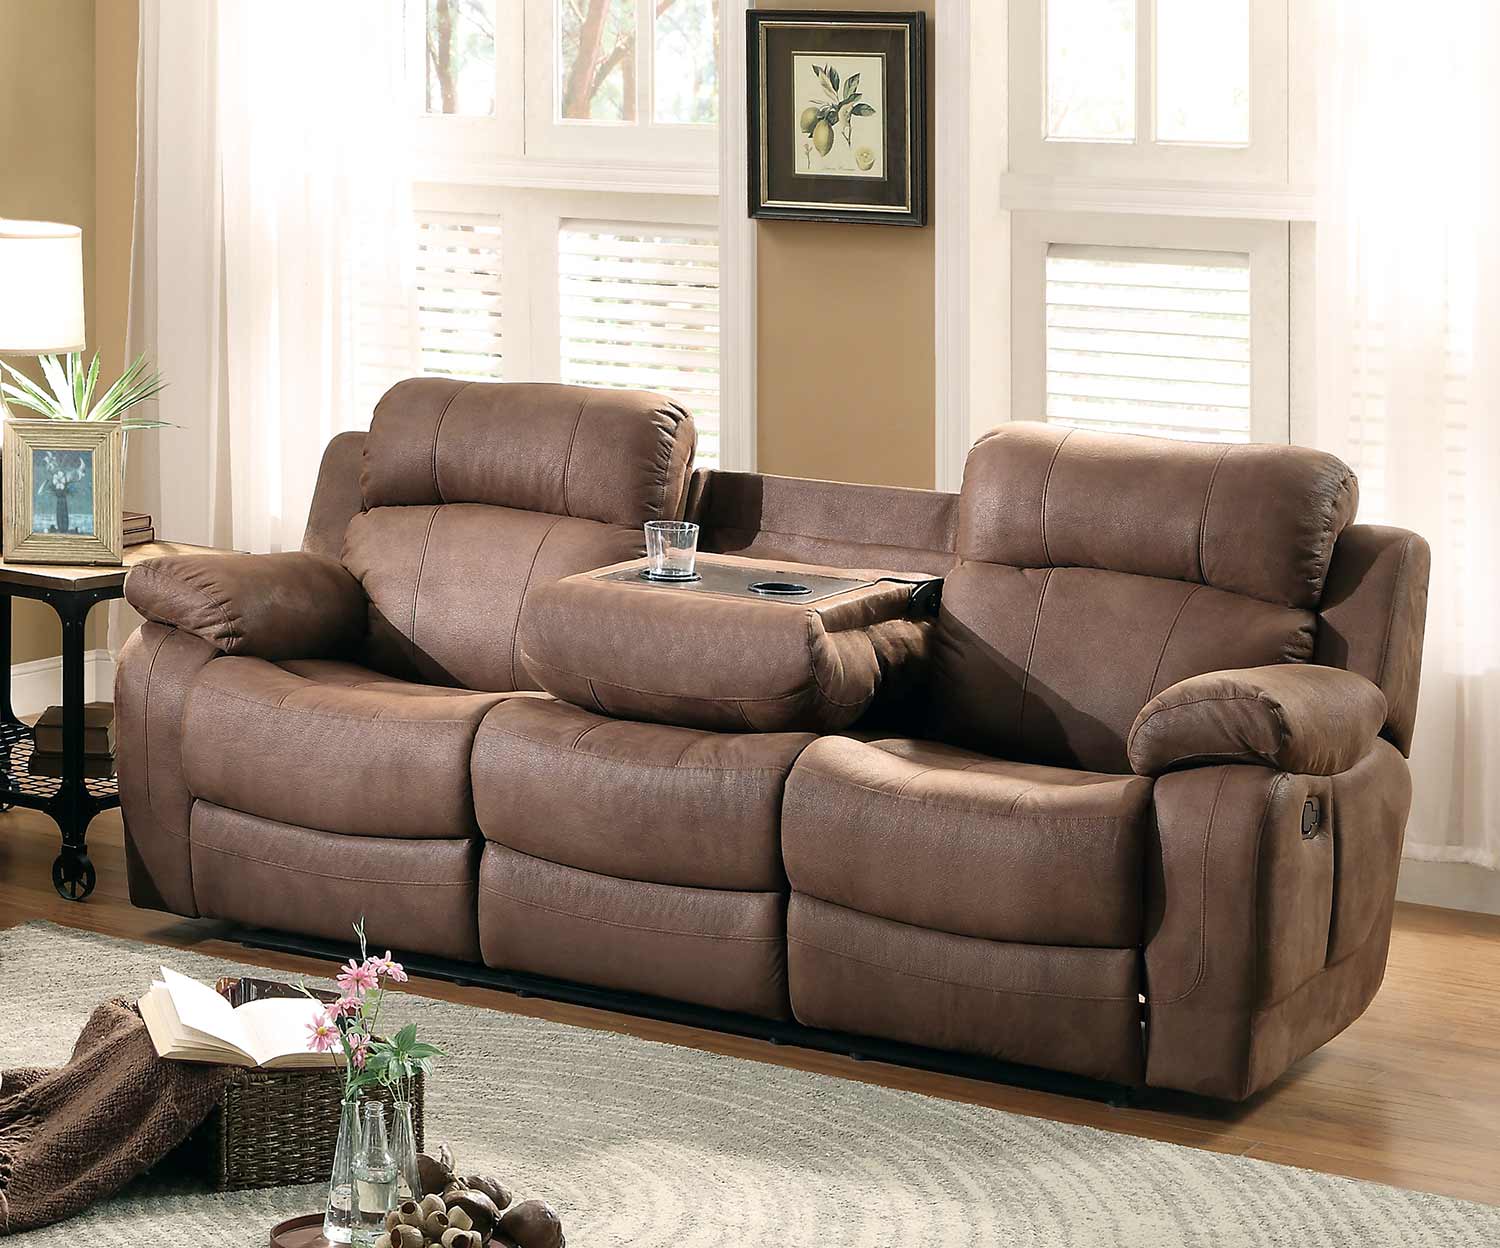 Homelegance Marille Double Reclining Sofa with Center Drop-Down Cup Holders - Dark Brown